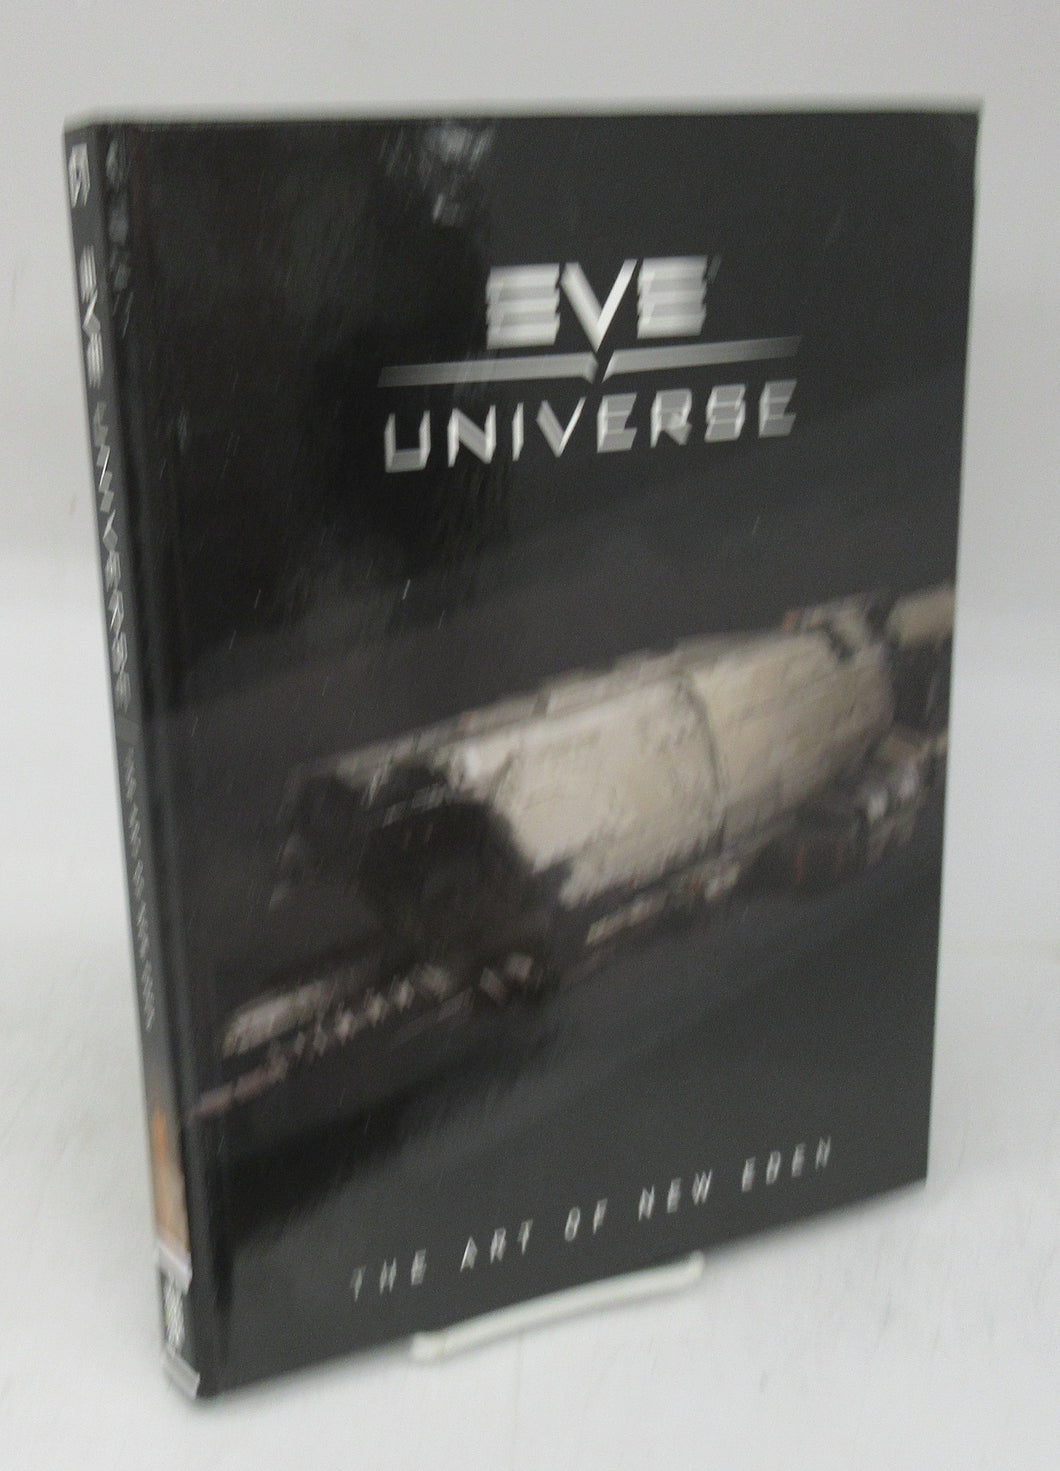 Eve Universe: The Art of New Eden